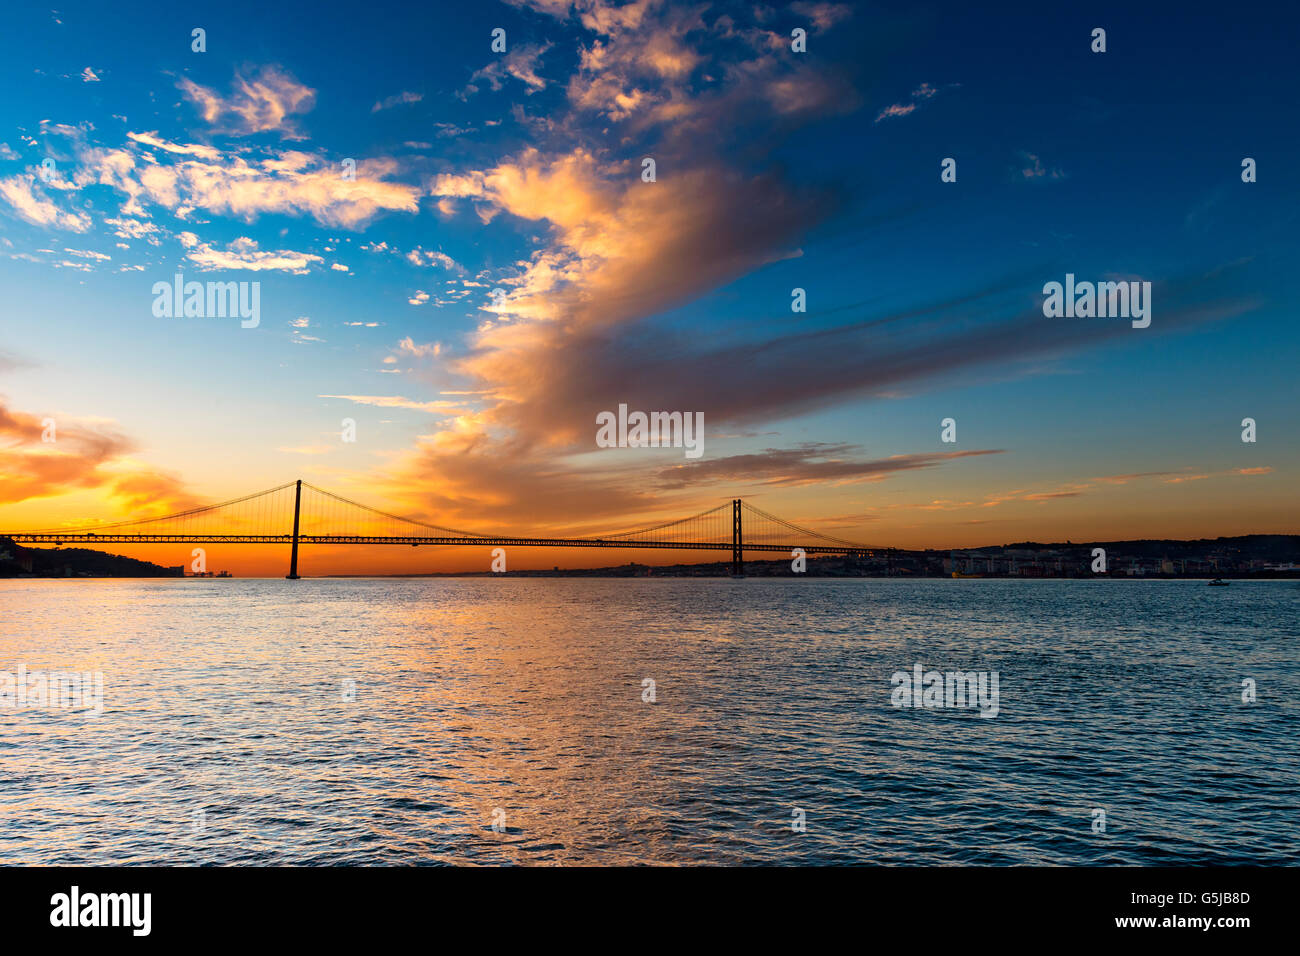 View of the bridge over the Tagus River in Lisbon, Portugal, at sunset Stock Photo